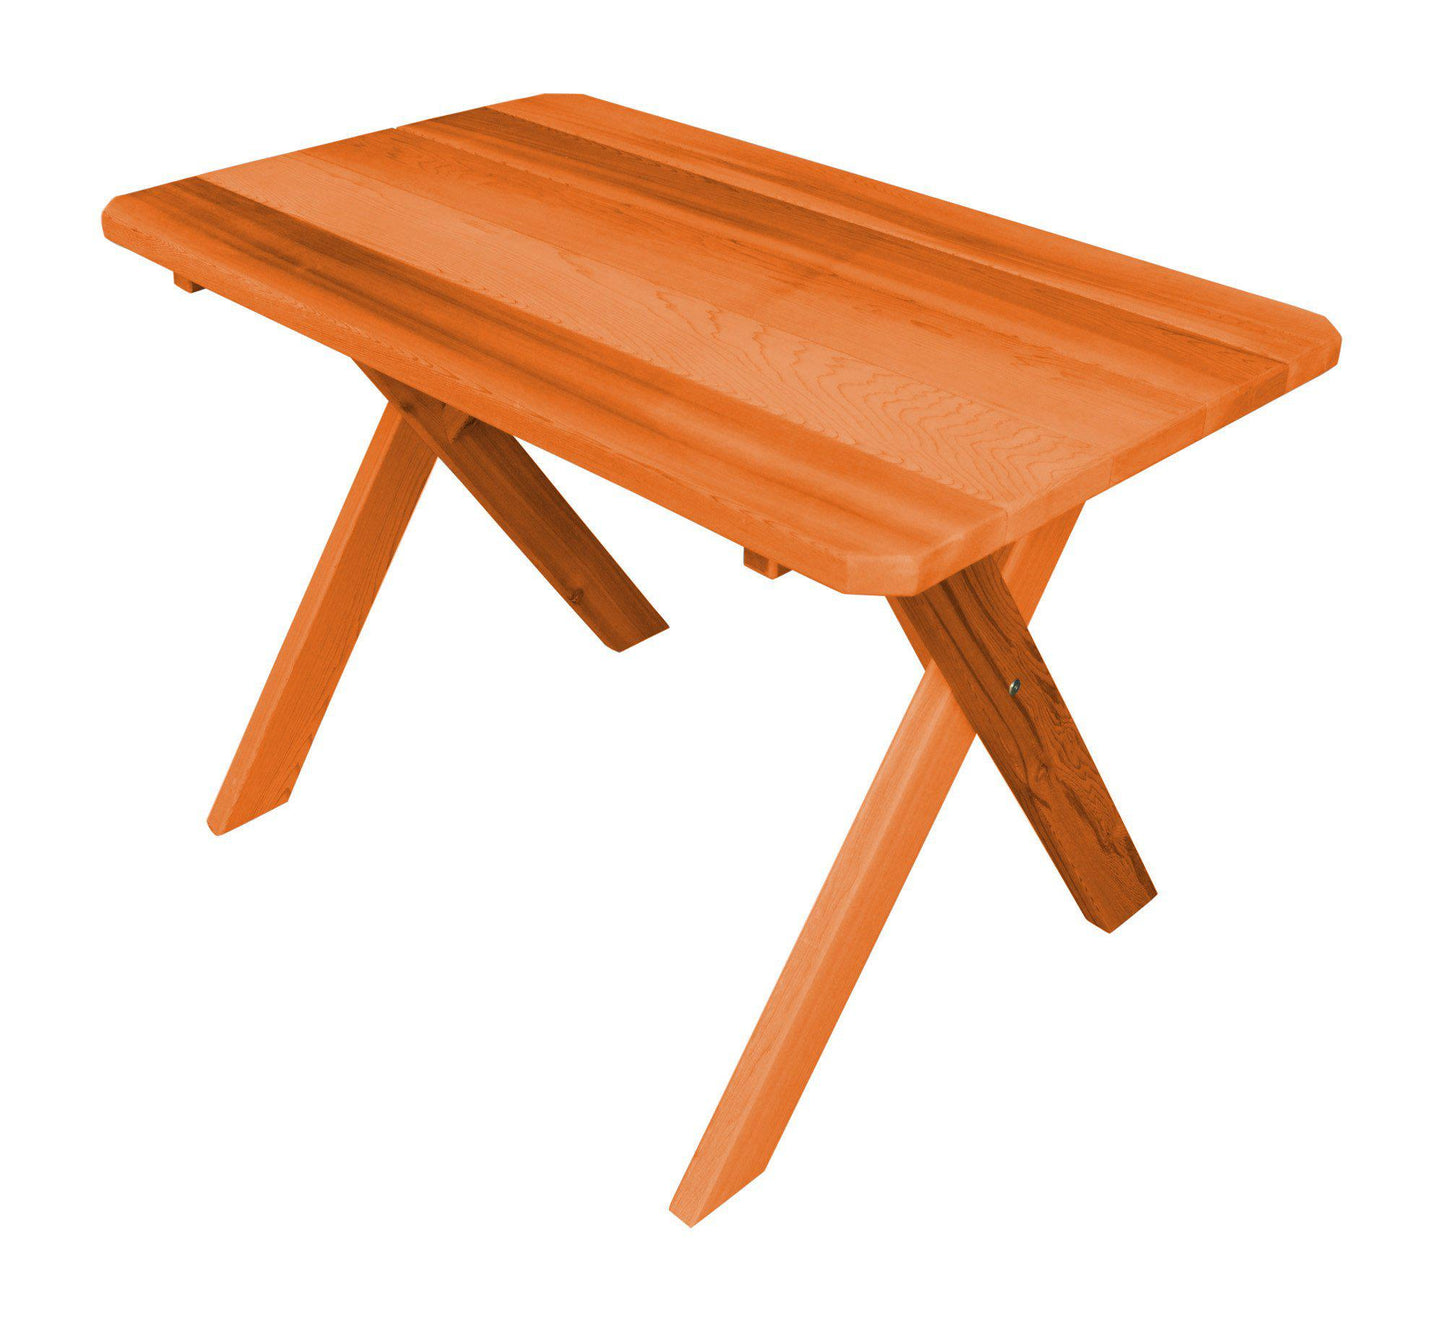 A&L FURNITURE CO. Western Red Cedar 44" Cross-leg Table Only - Specify for FREE 2" Umbrella Hole - LEAD TIME TO SHIP 2 WEEKS